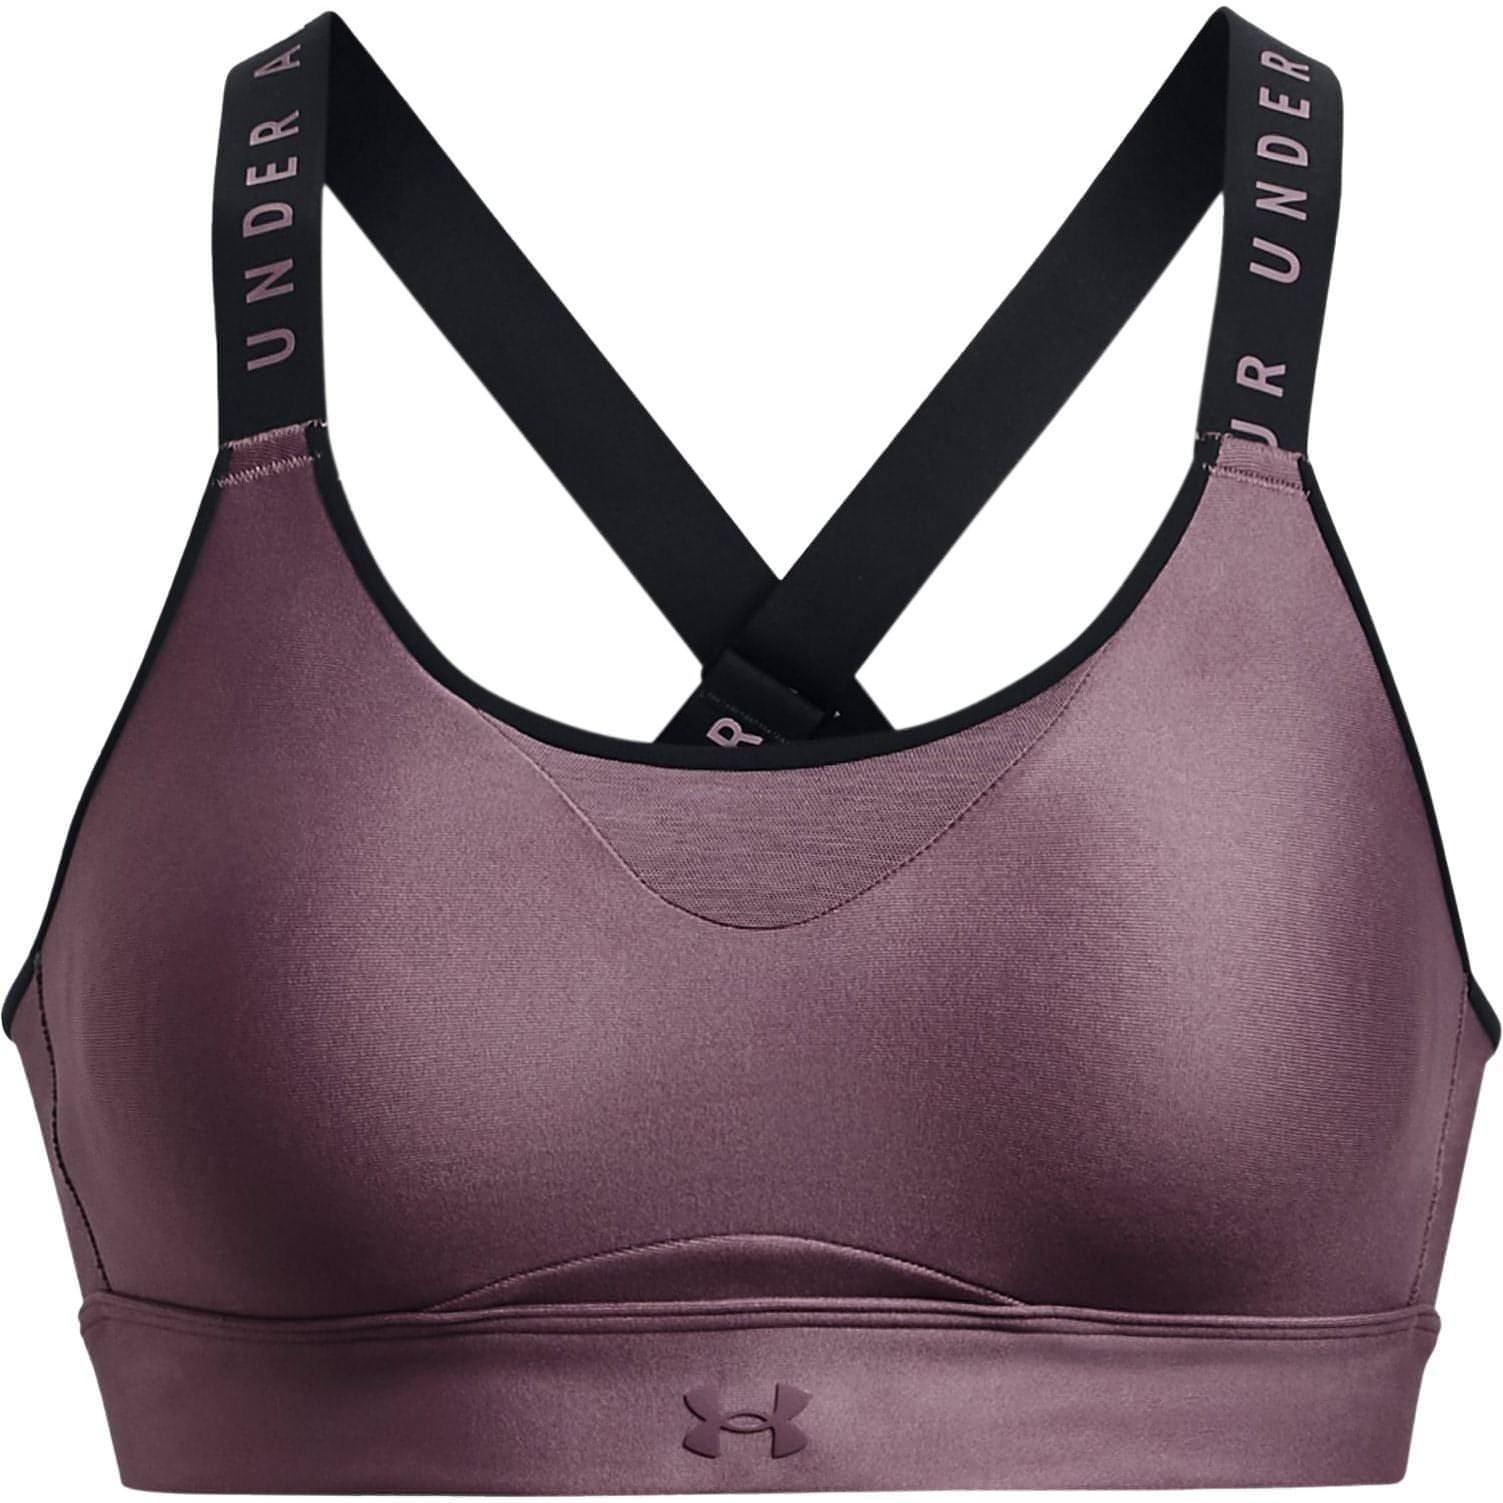 Under Armour Infinity High Sports Bra Front - Front View